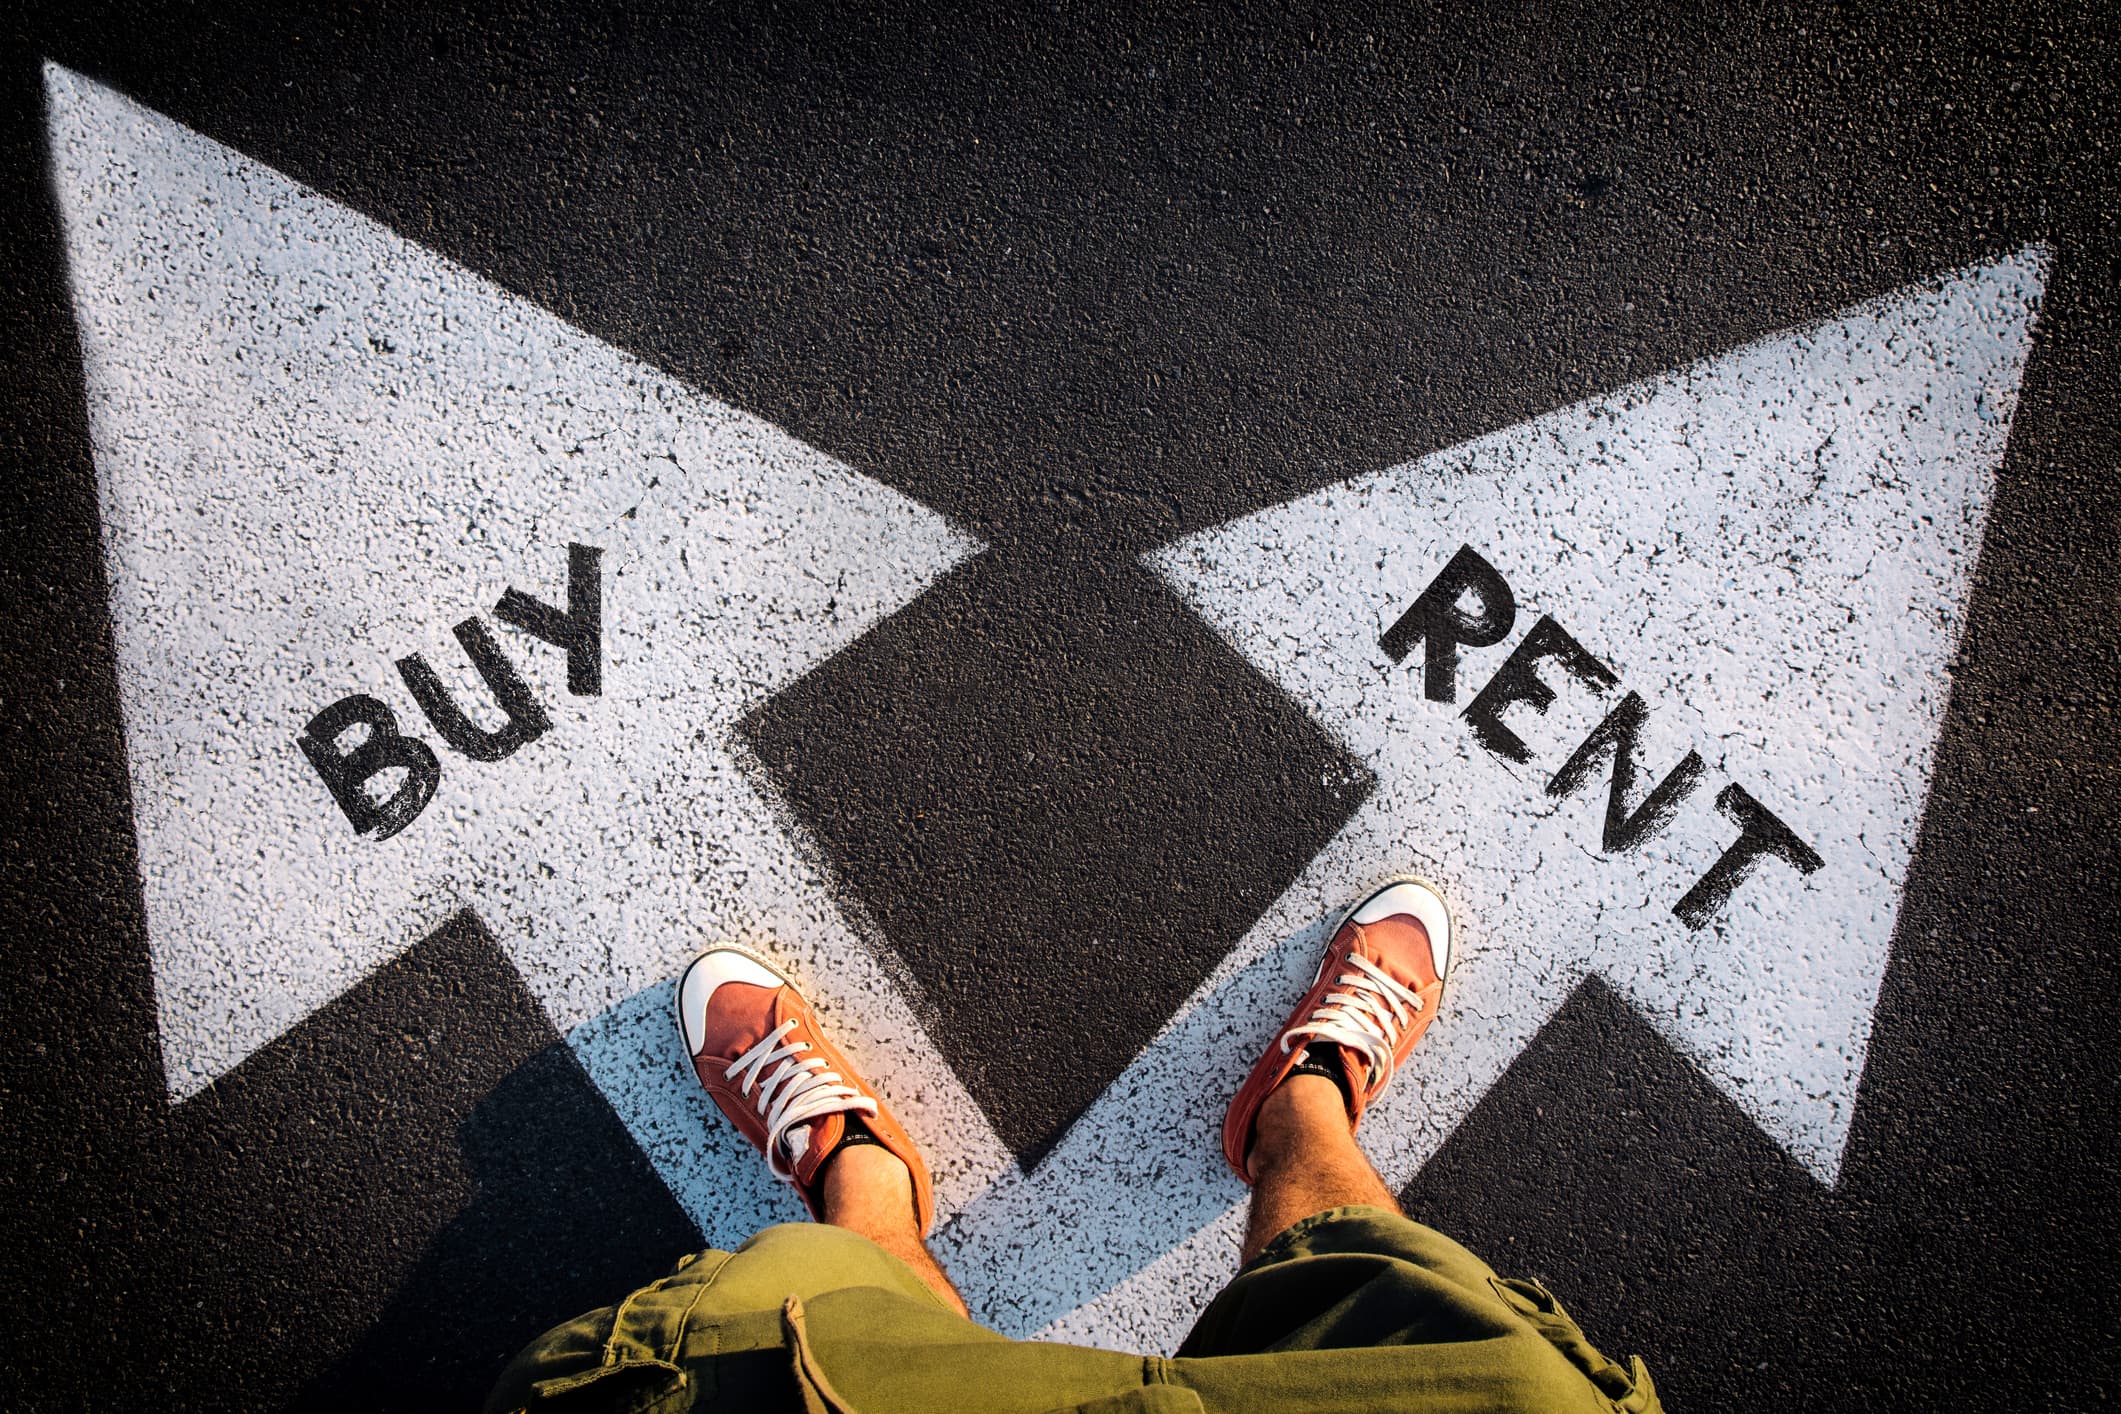 Should you rent or buy a home? Prices are surging either way, and that’s complicating things